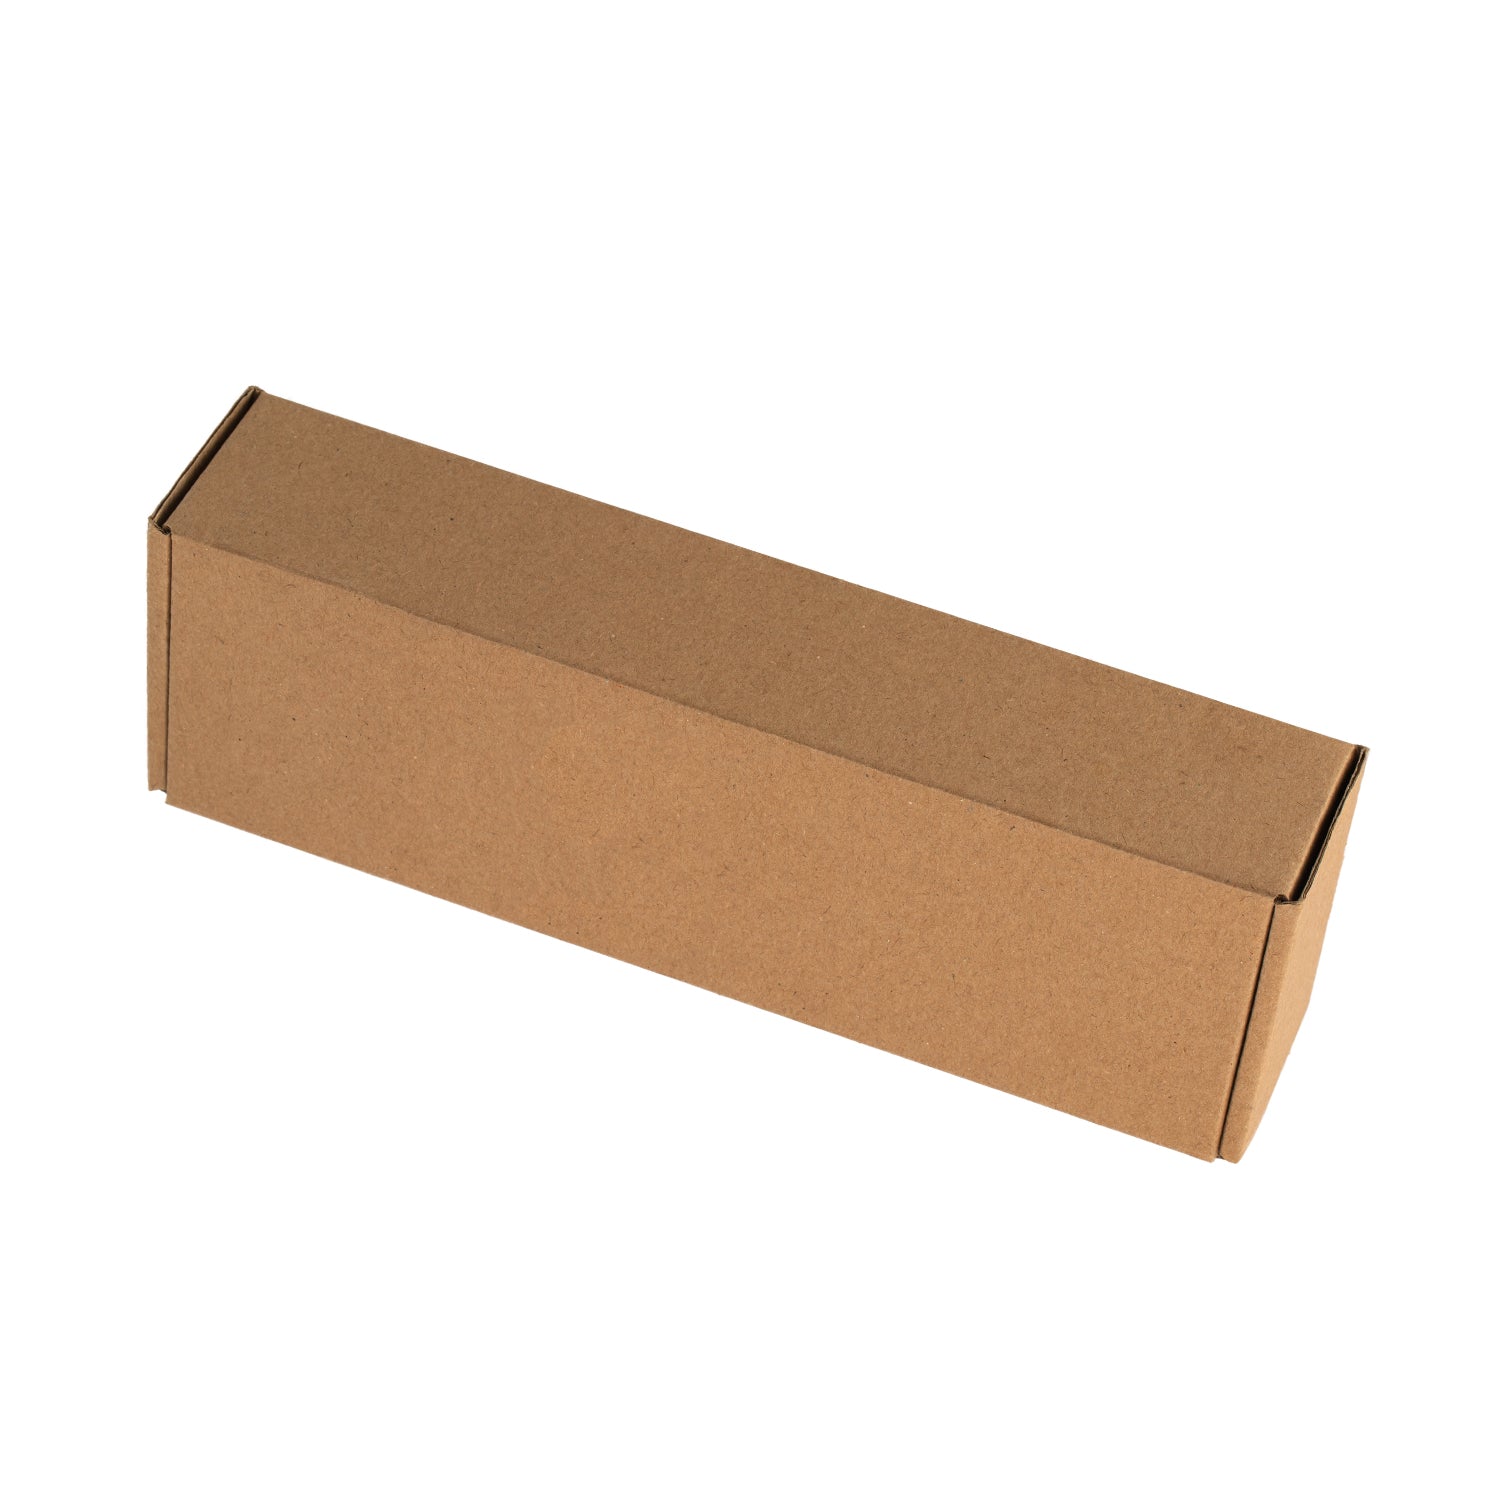 0563 BROWN BOX FOR PRODUCT PACKING 9x9x31 DeoDap